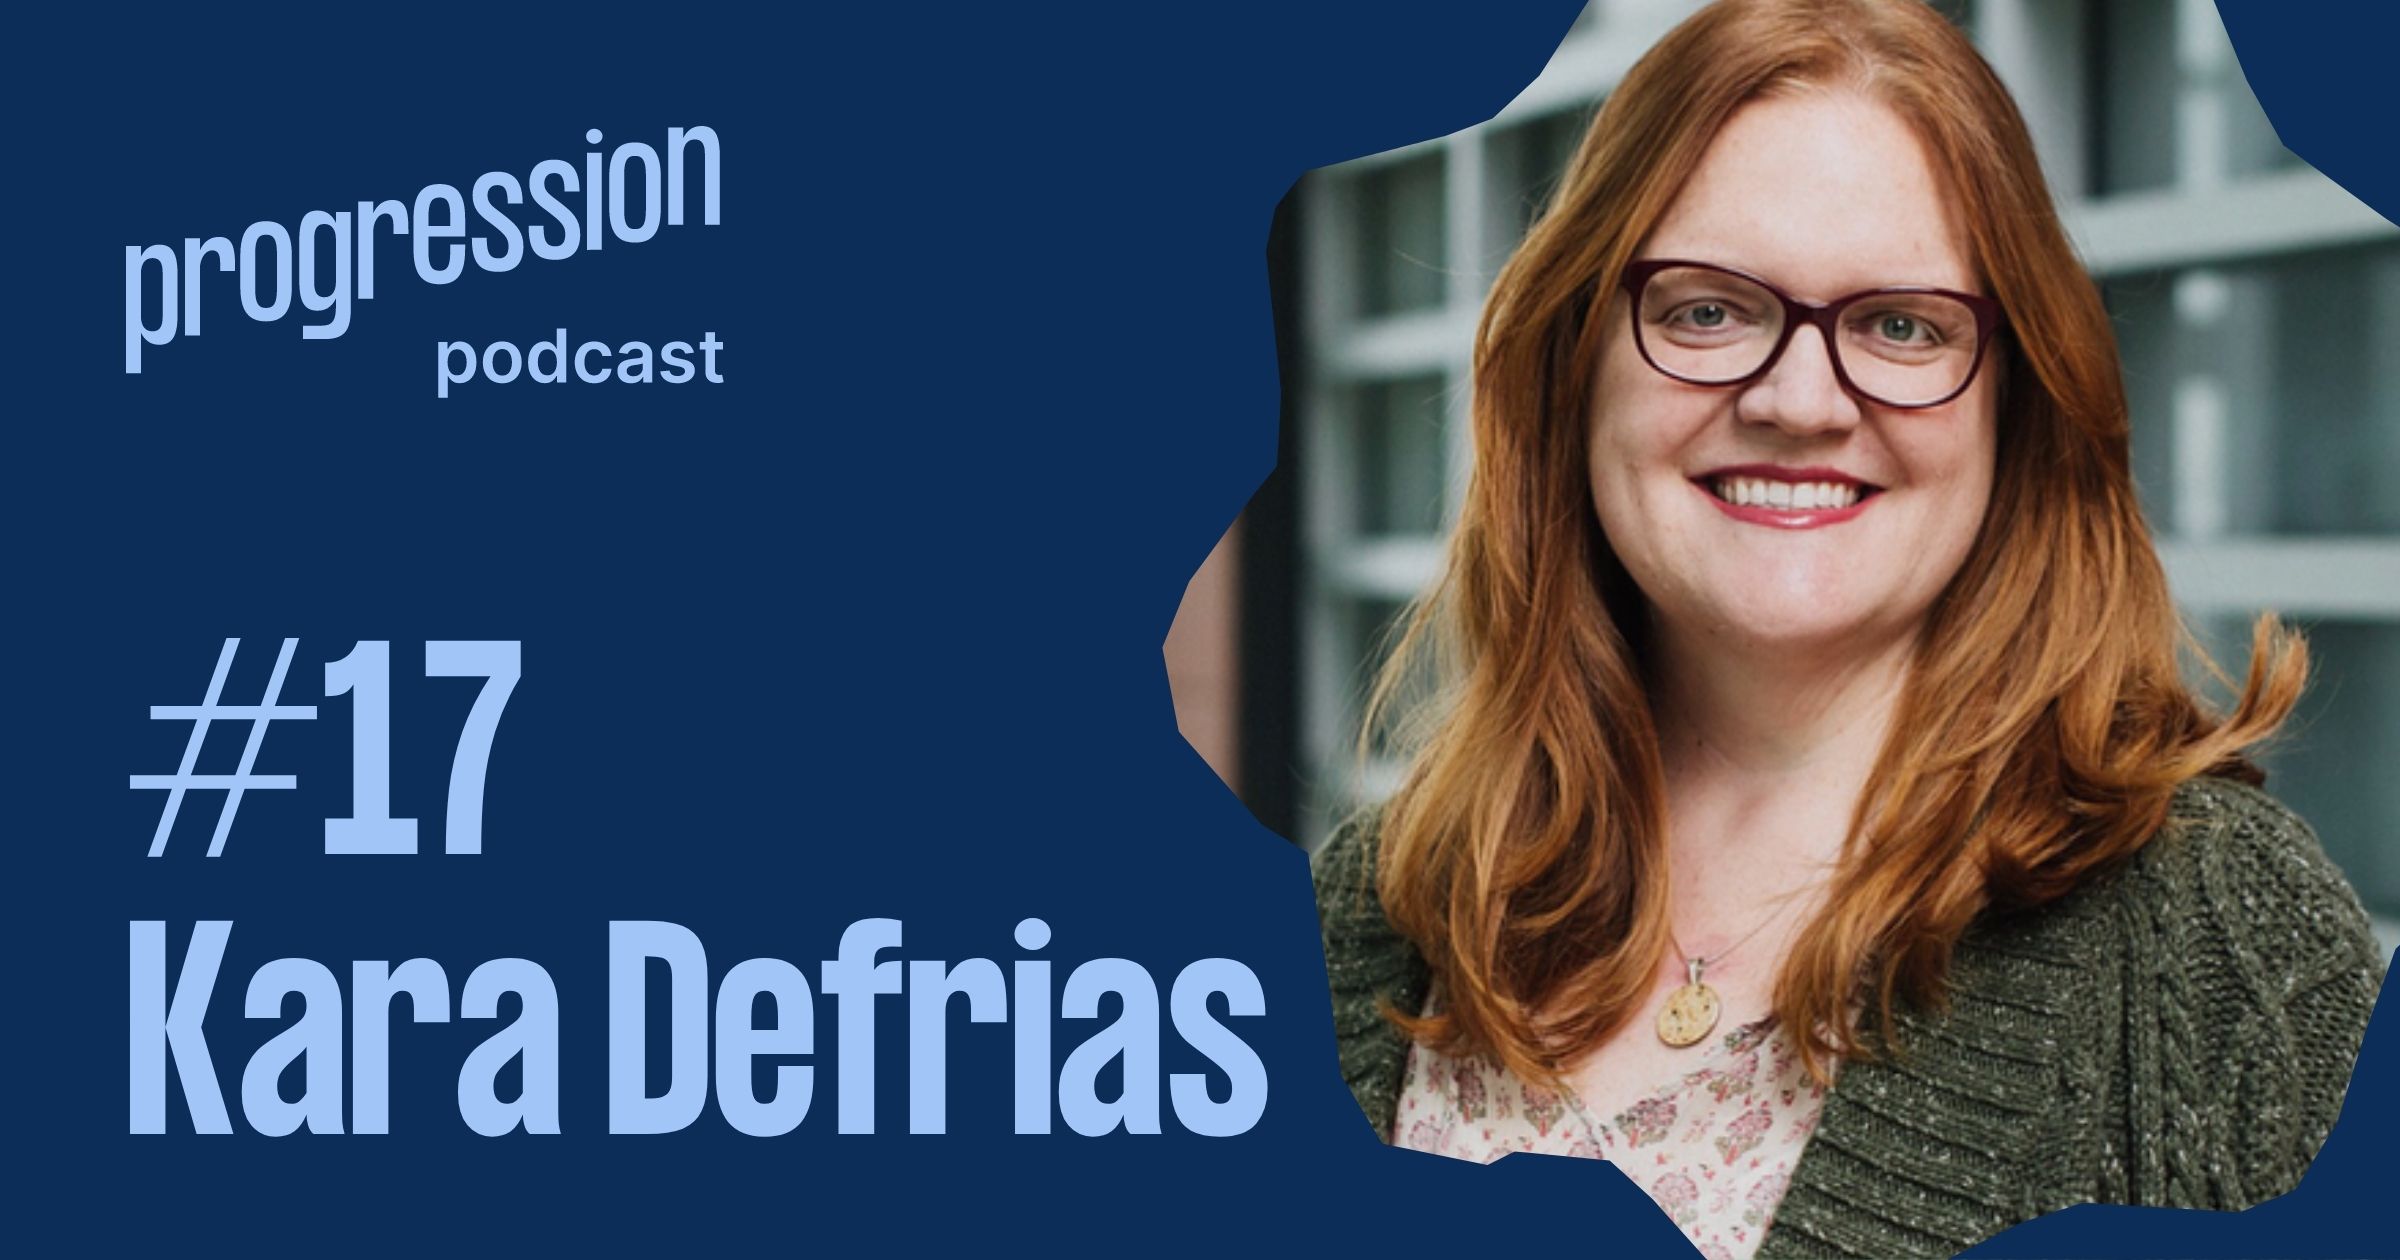 Podcast #17: Kara DeFrias on changing careers, curing cancer and being a sponsor